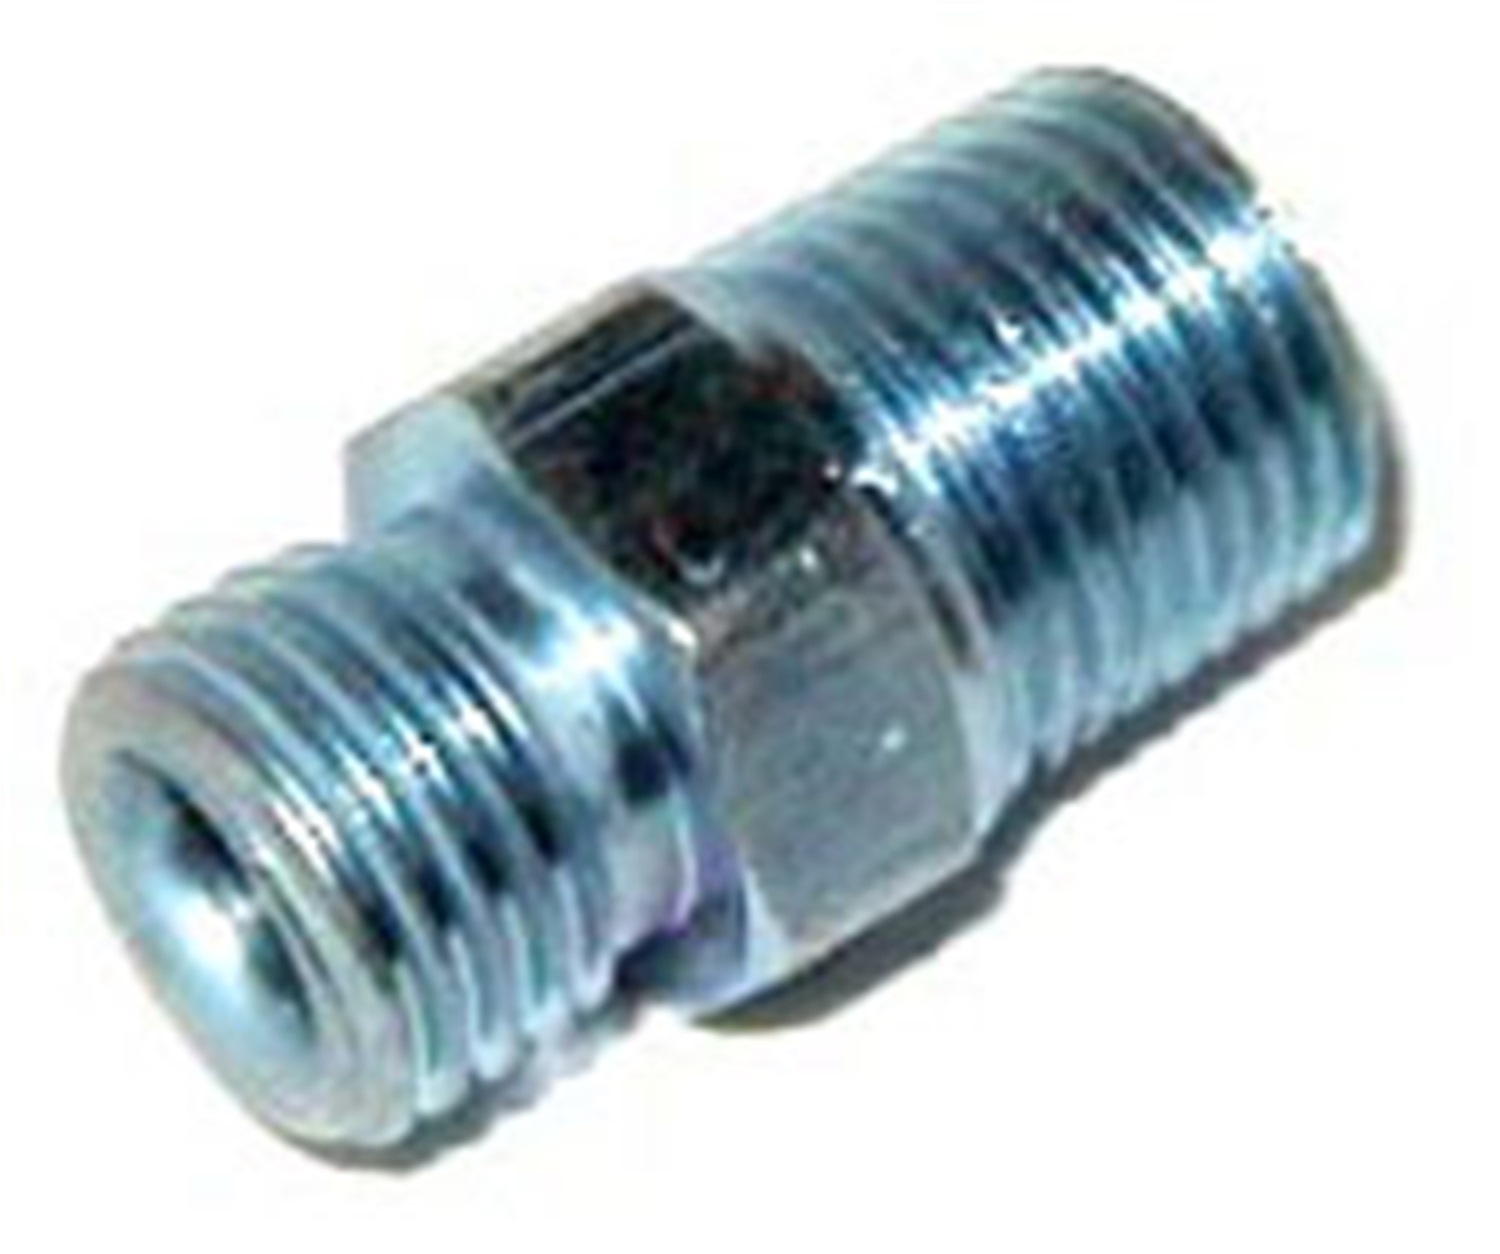 Fuel Hose Fitting, NOS Fittings NOS, CHROME 1/8 NPT X 3/16in.